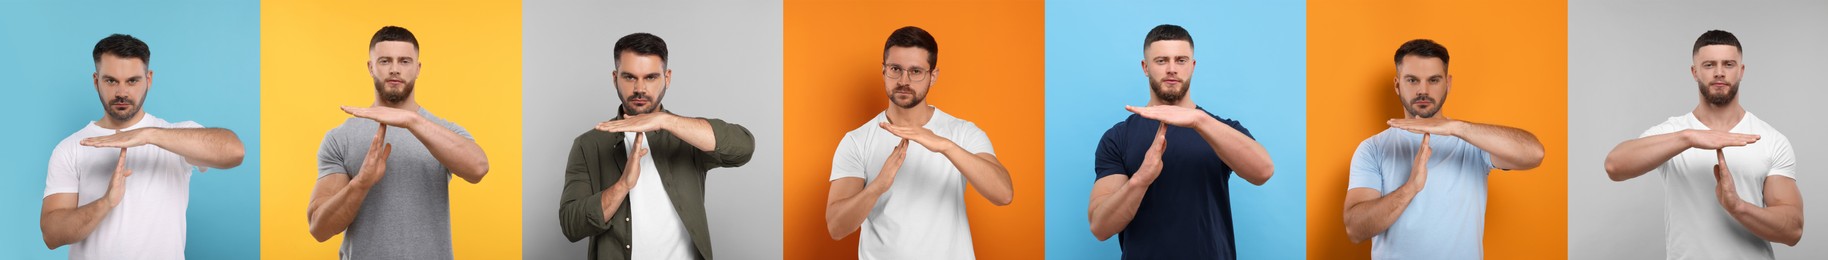 Men showing time out gesture on different color backgrounds. Collage with photos